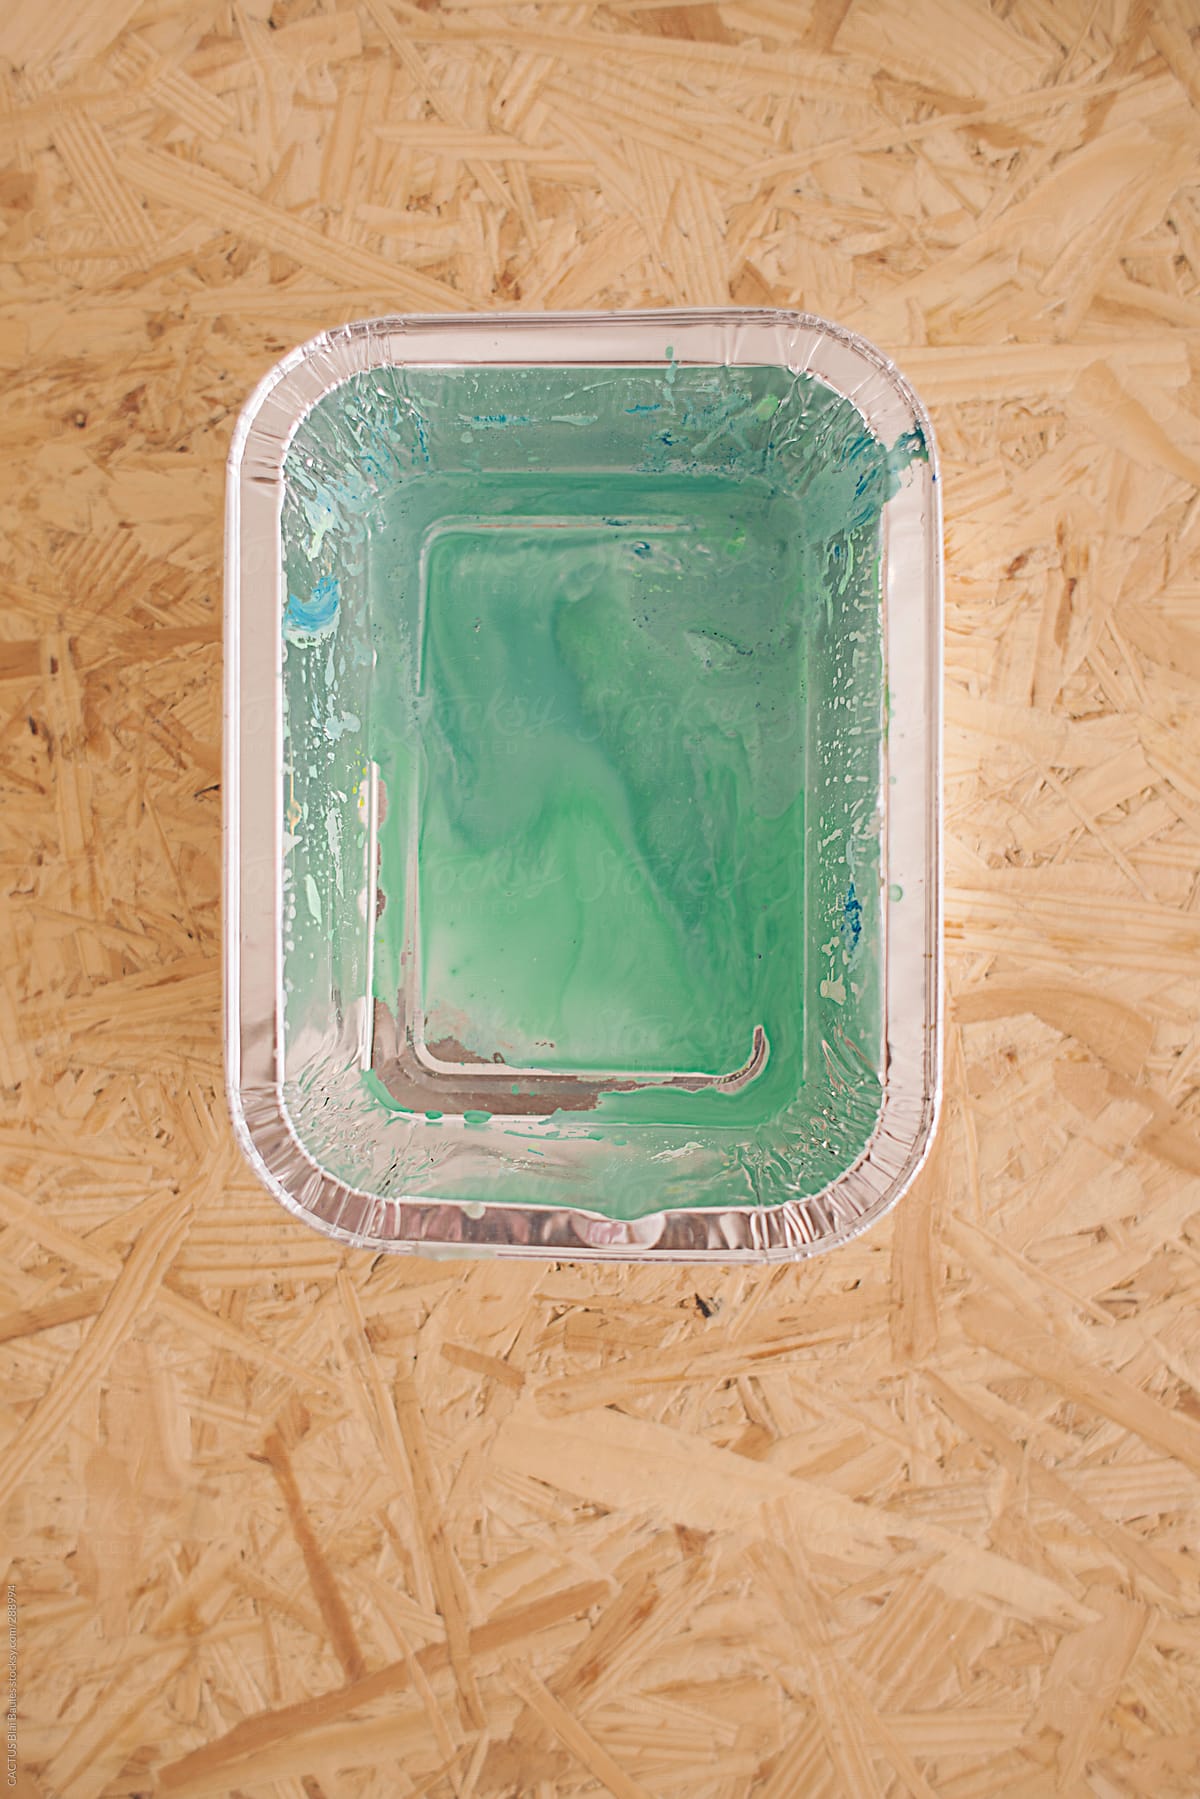 Container with green paint on a wooden table